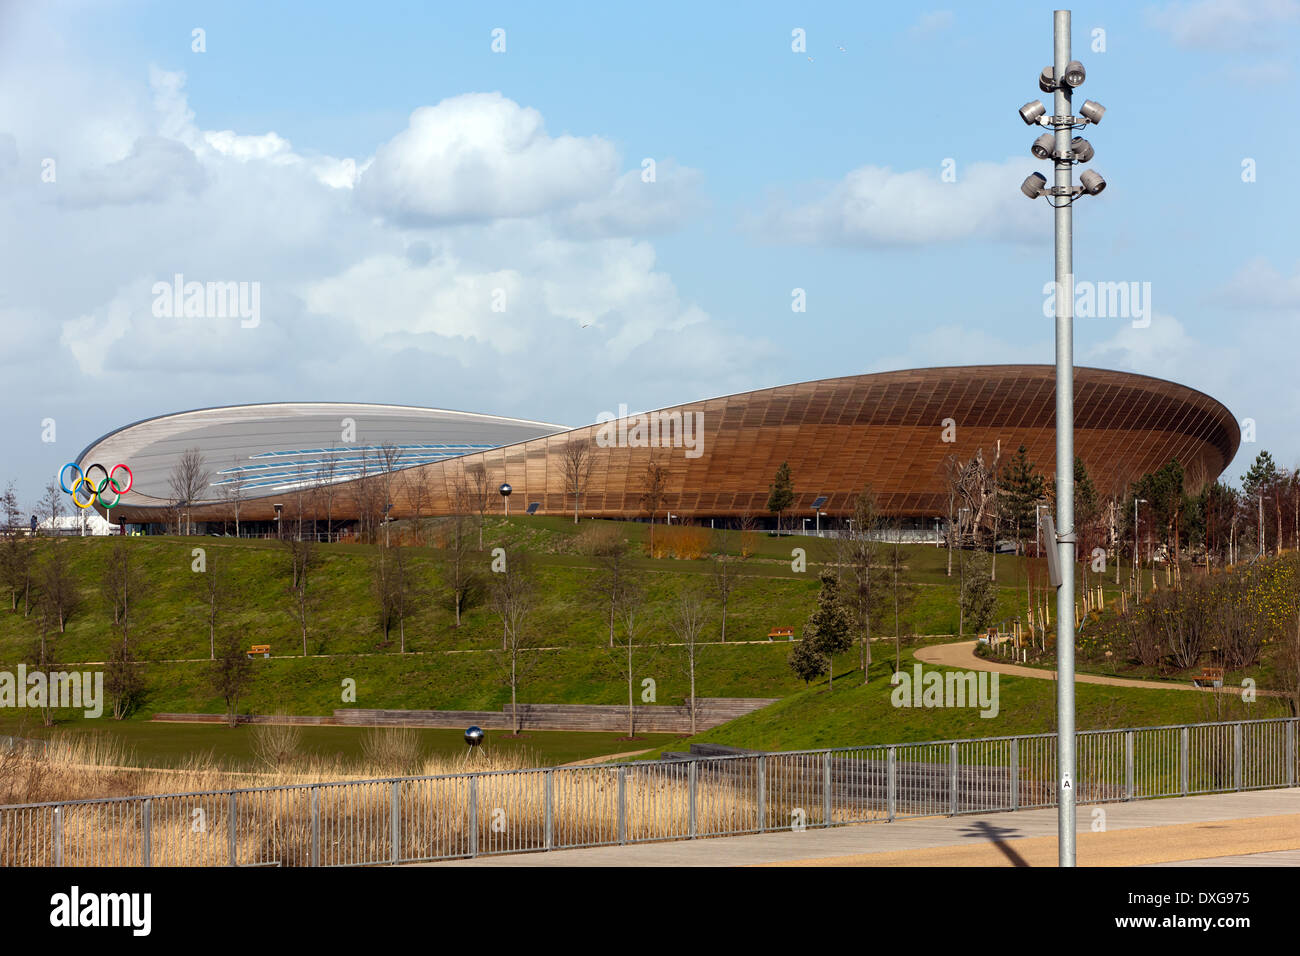 The Lee Valley VeloPark in the Queen Elizabeth Olympic Park, Atratford. Stock Photo